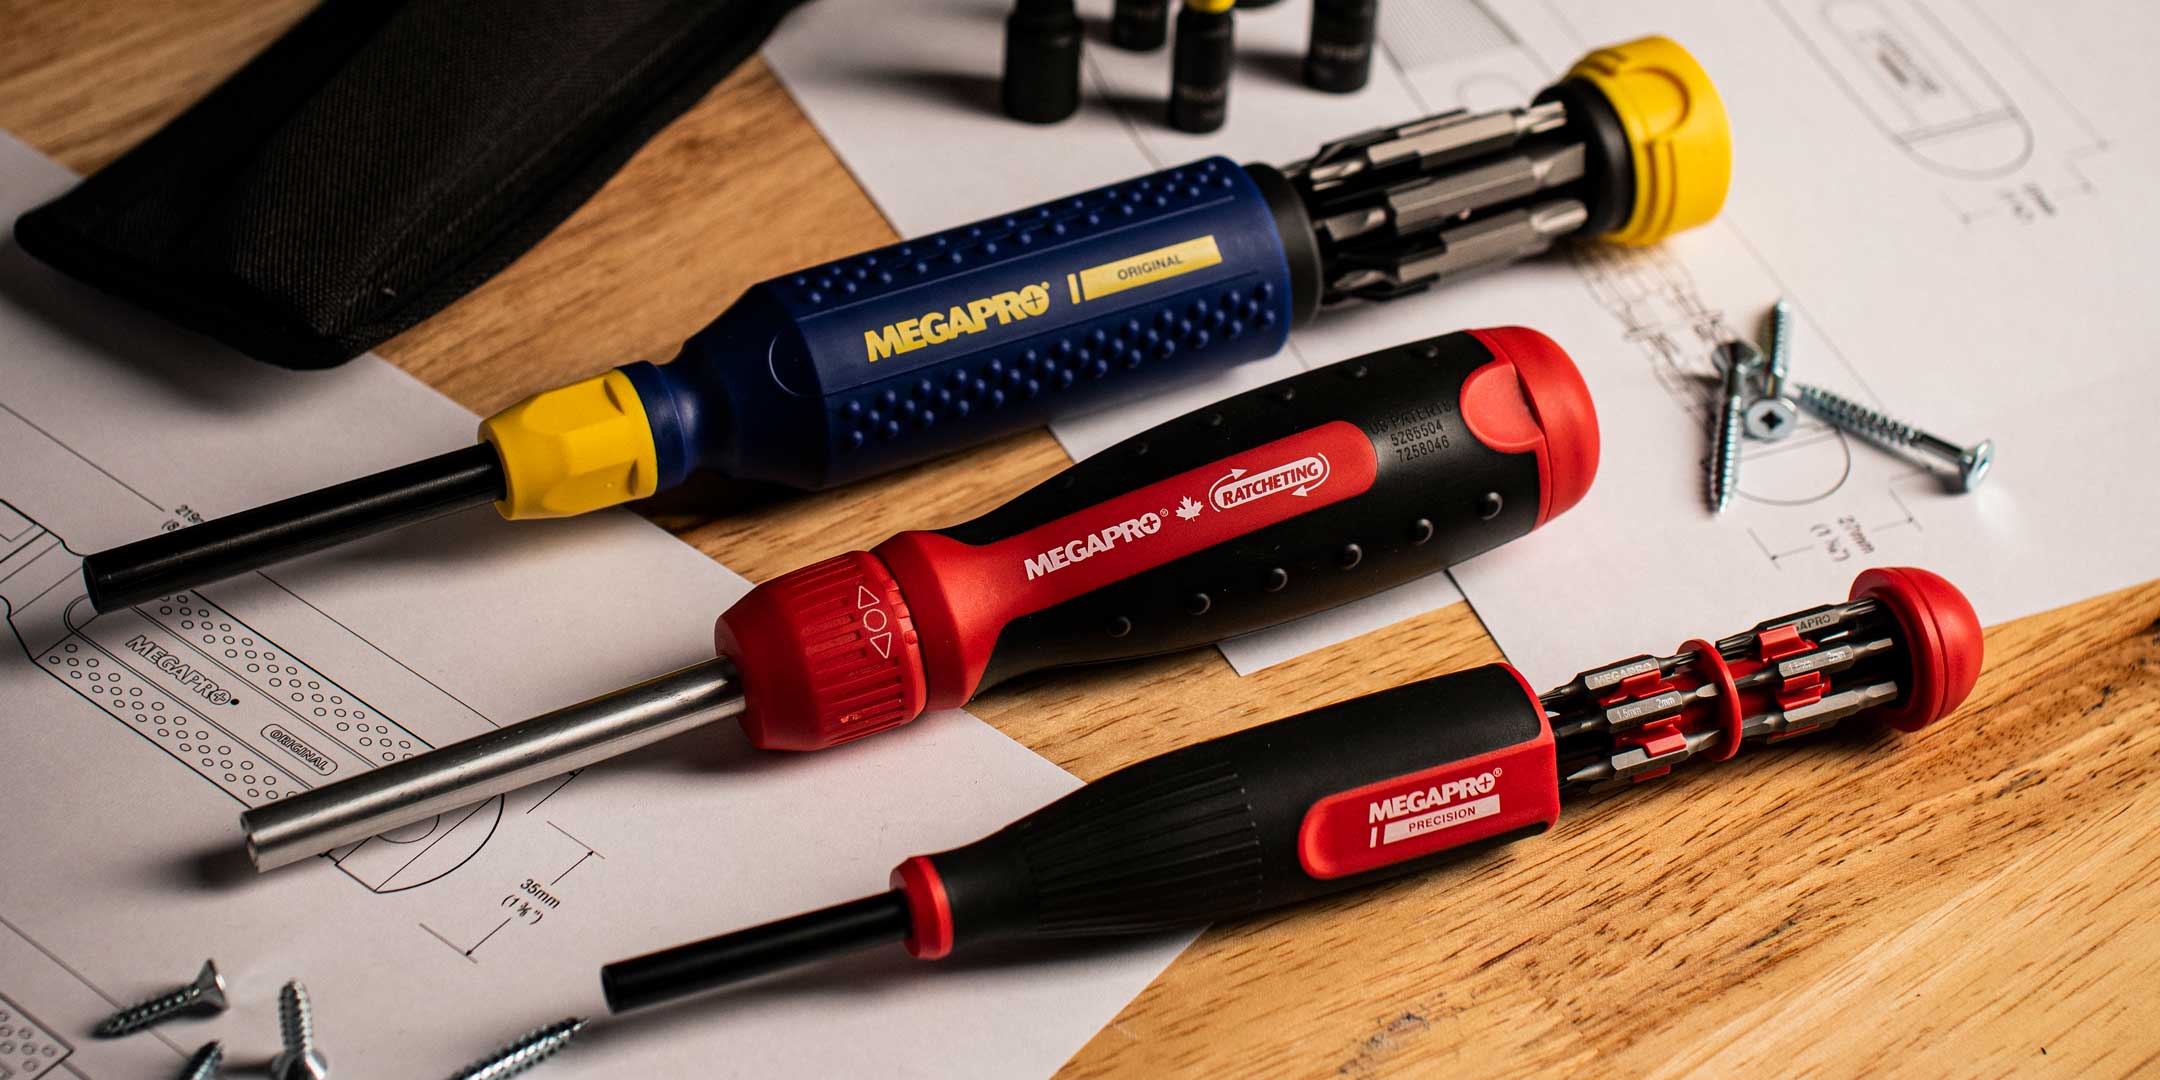 Megapro Tools Canada | All-in-One Multi-bit Screwdrivers